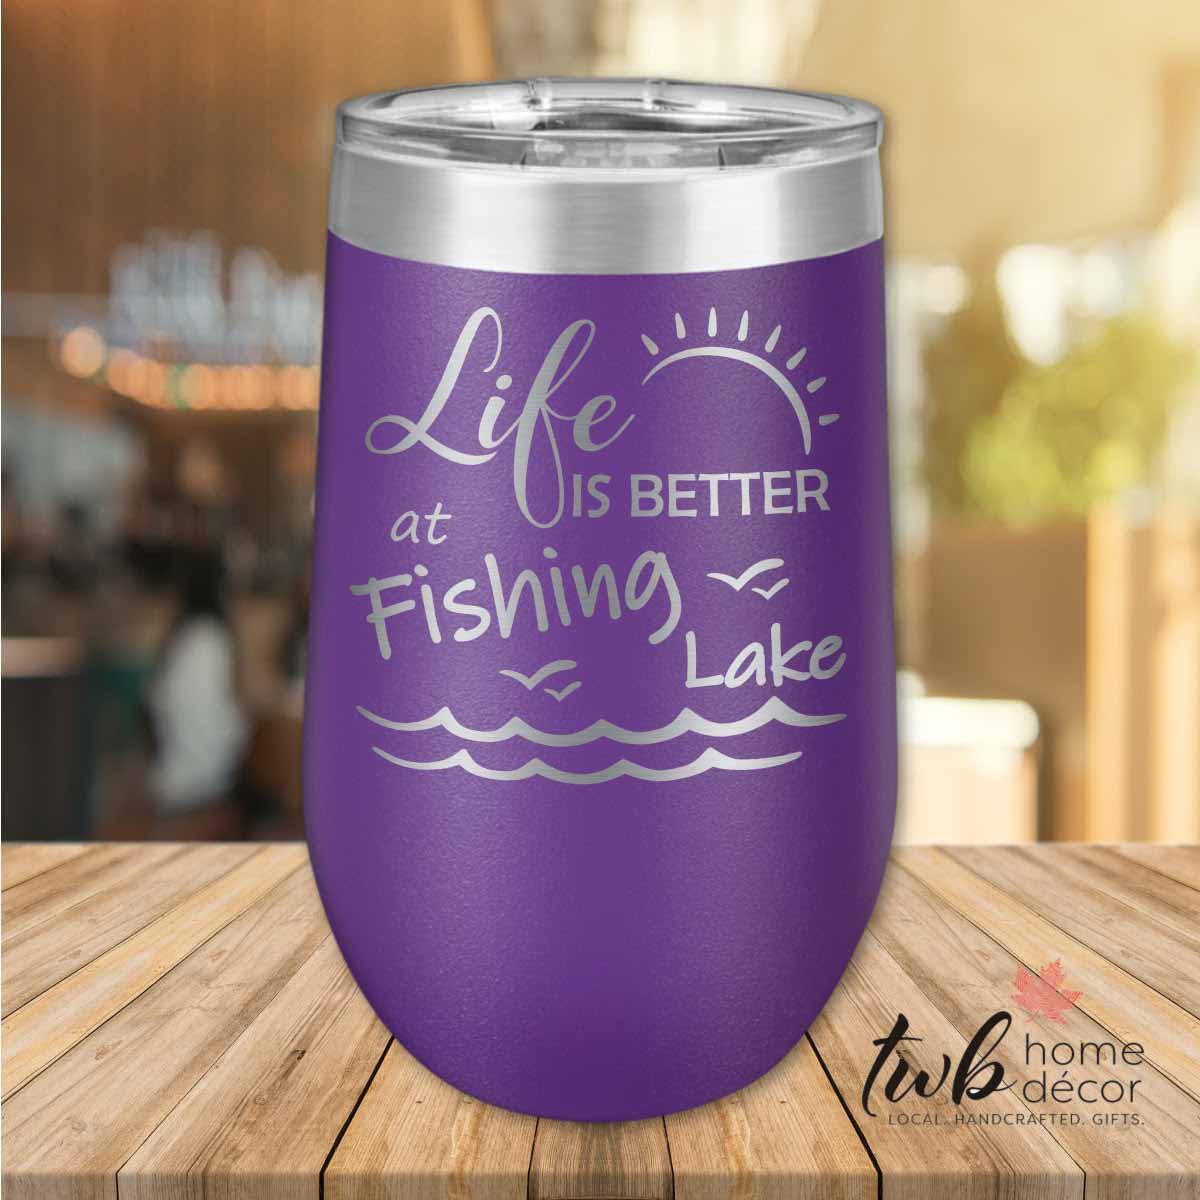 Life is Better at Fishing Lake Thermal - TWB Home Decor